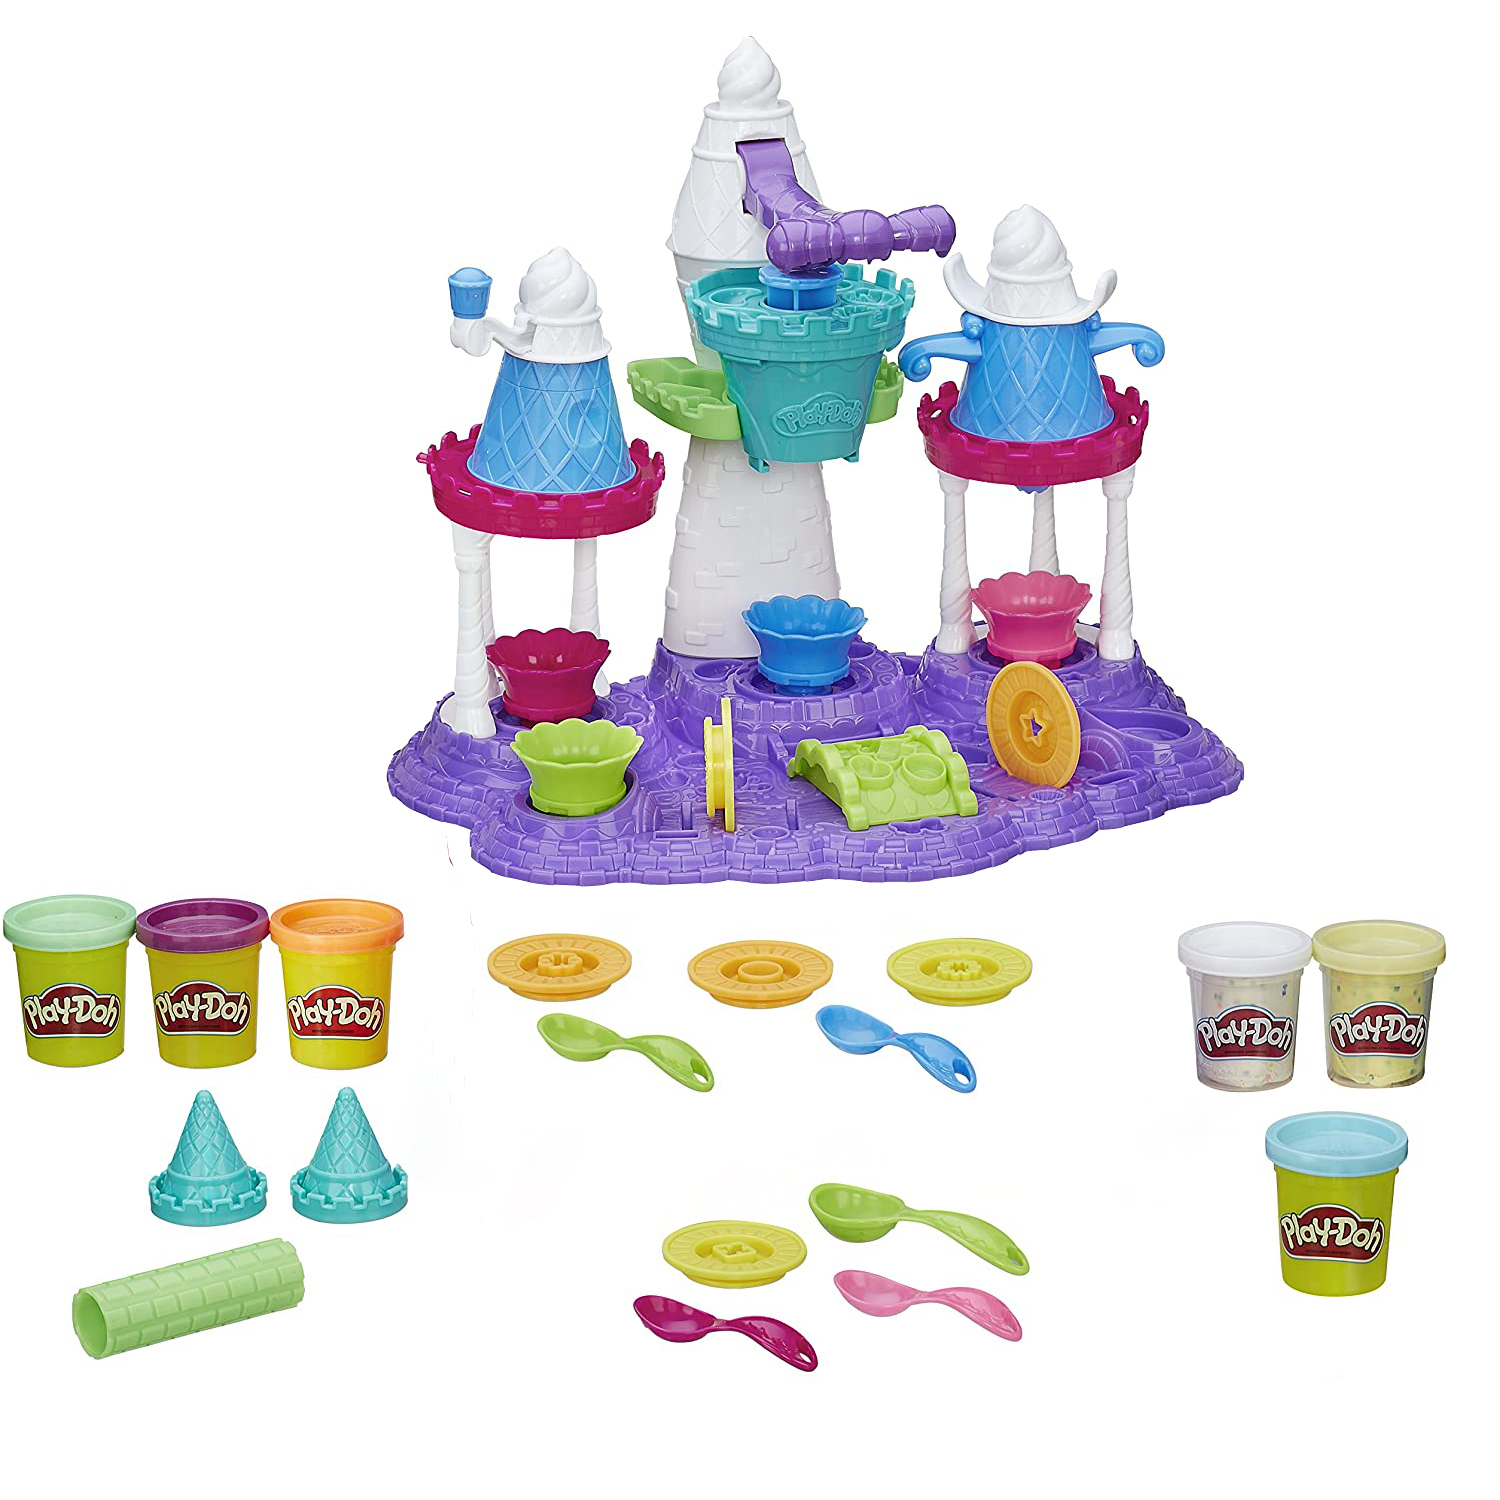 Pate a modeler glace - Play-Doh